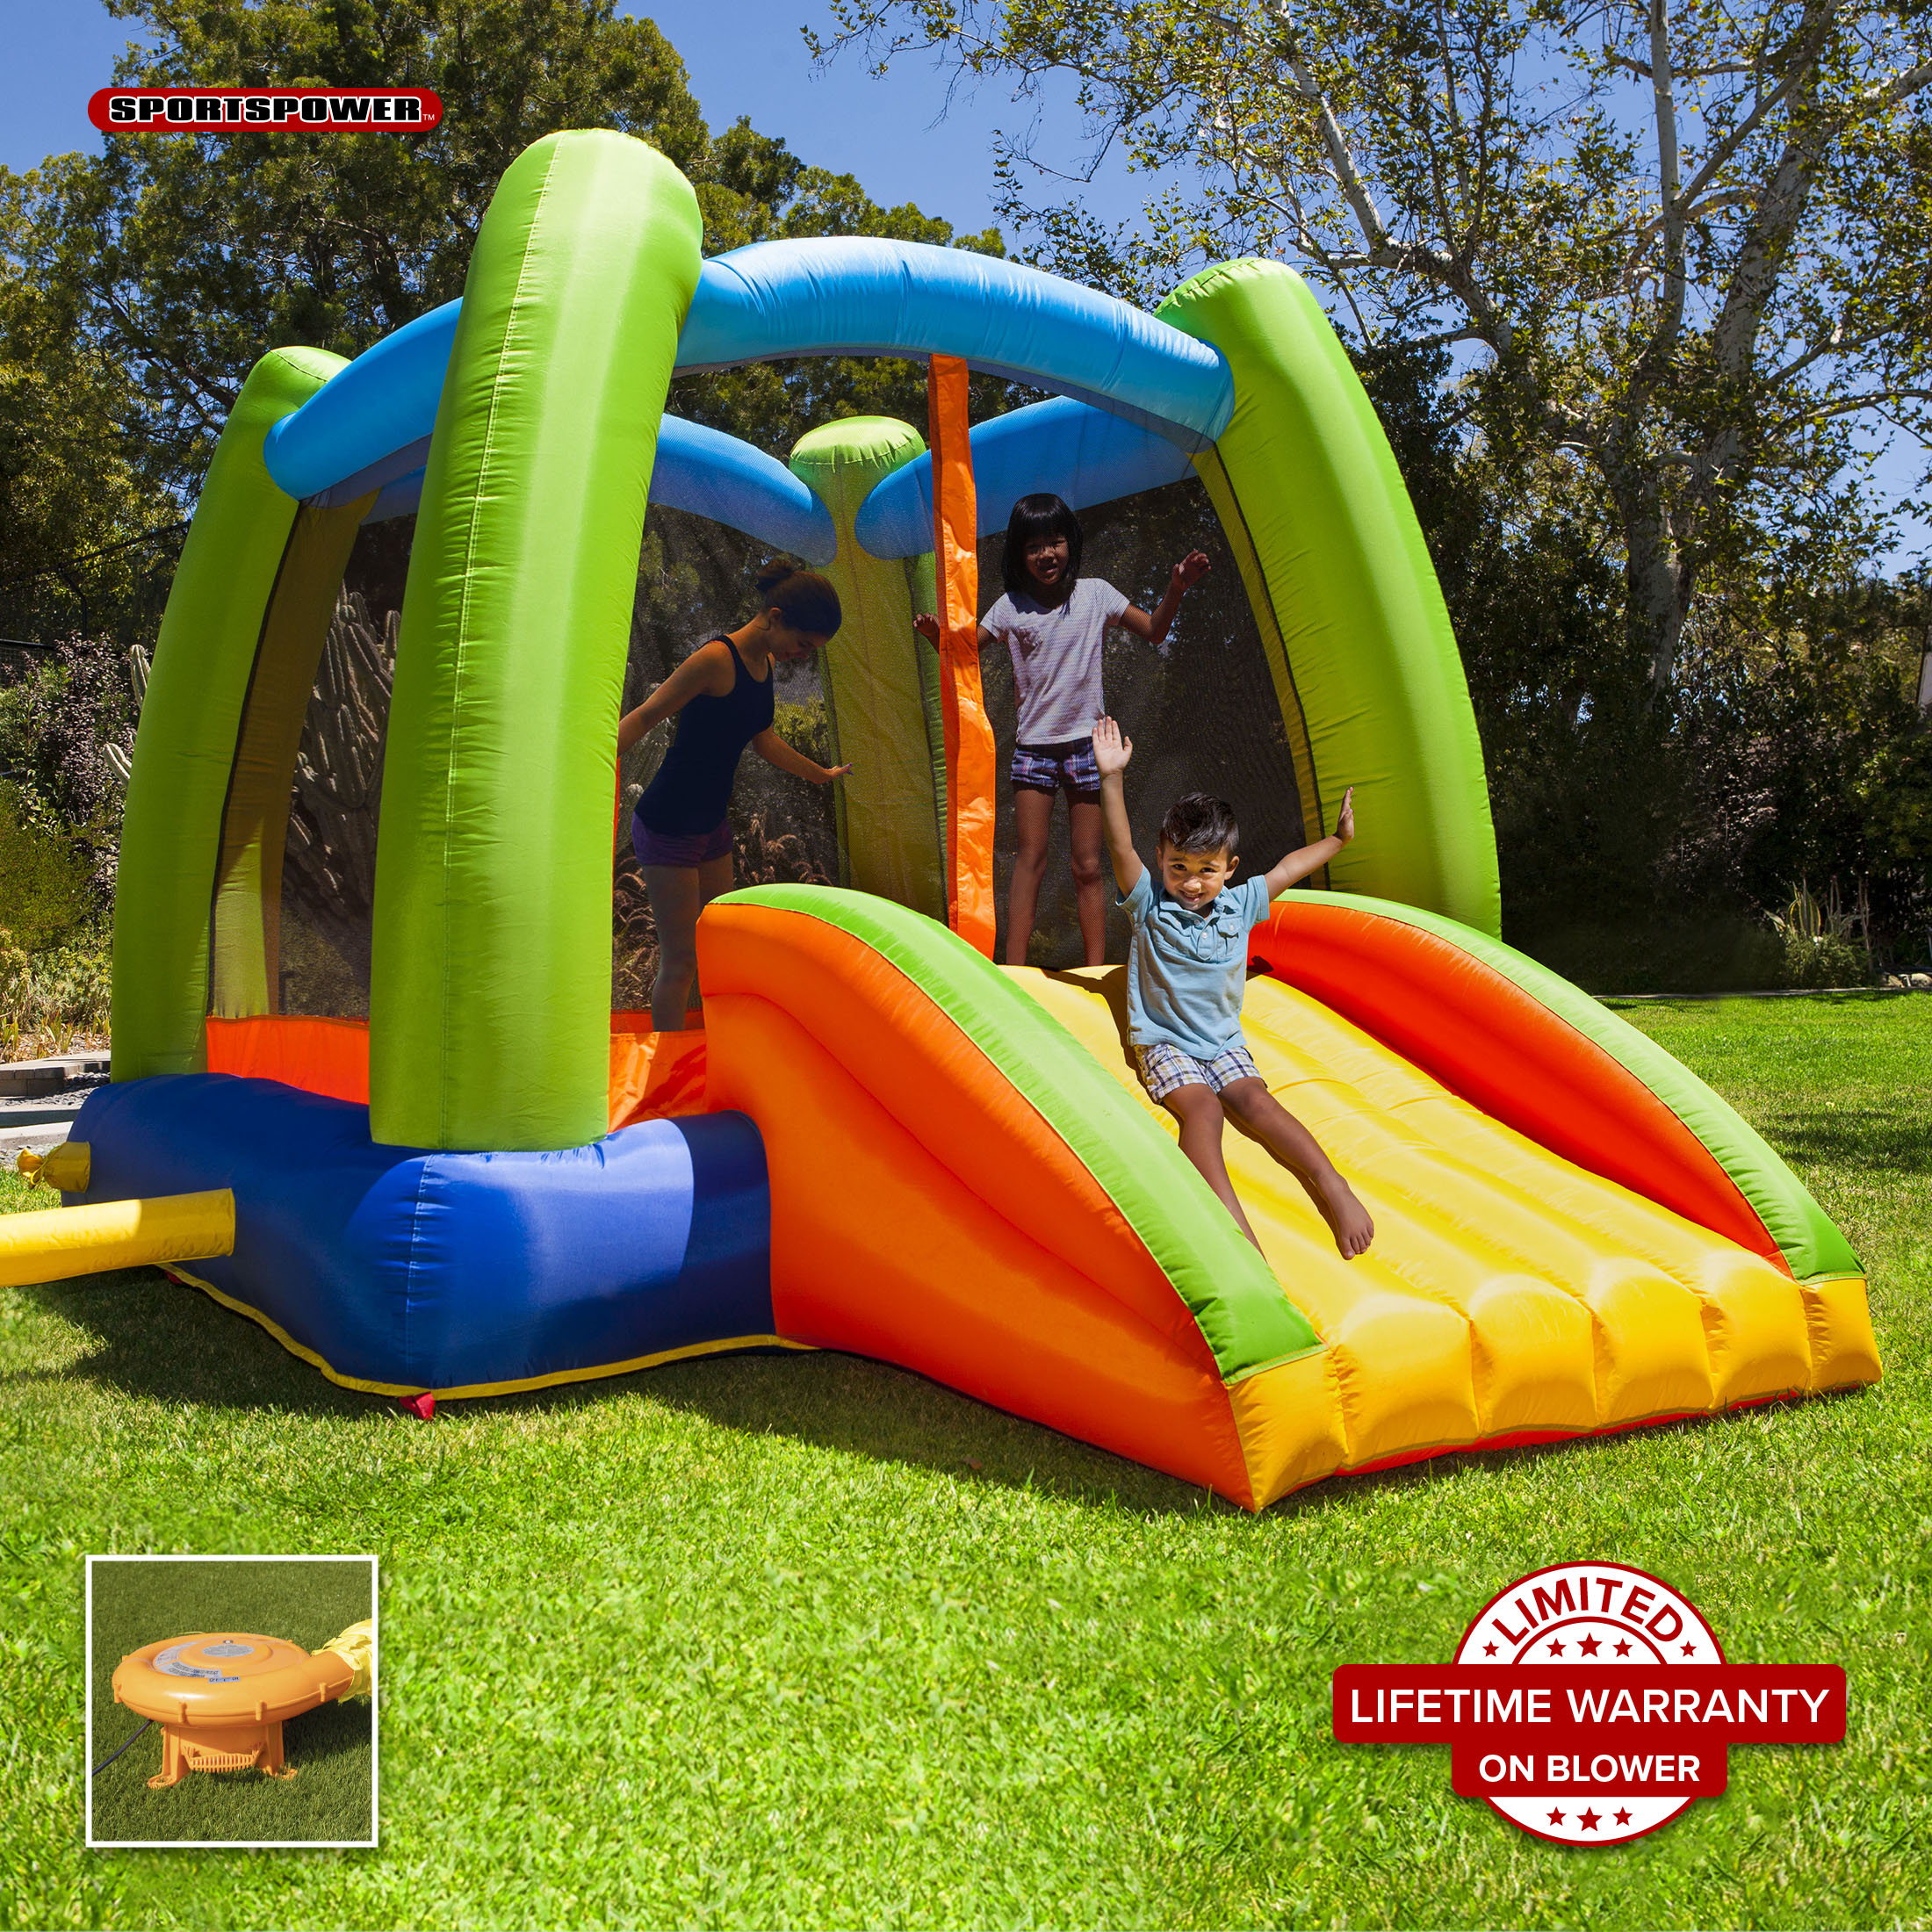 Sportspower My First Jump 'n Play, 12 feet Inflatable Bounce House with Lifetime Warranty on Heavy Duty Blower - image 1 of 7